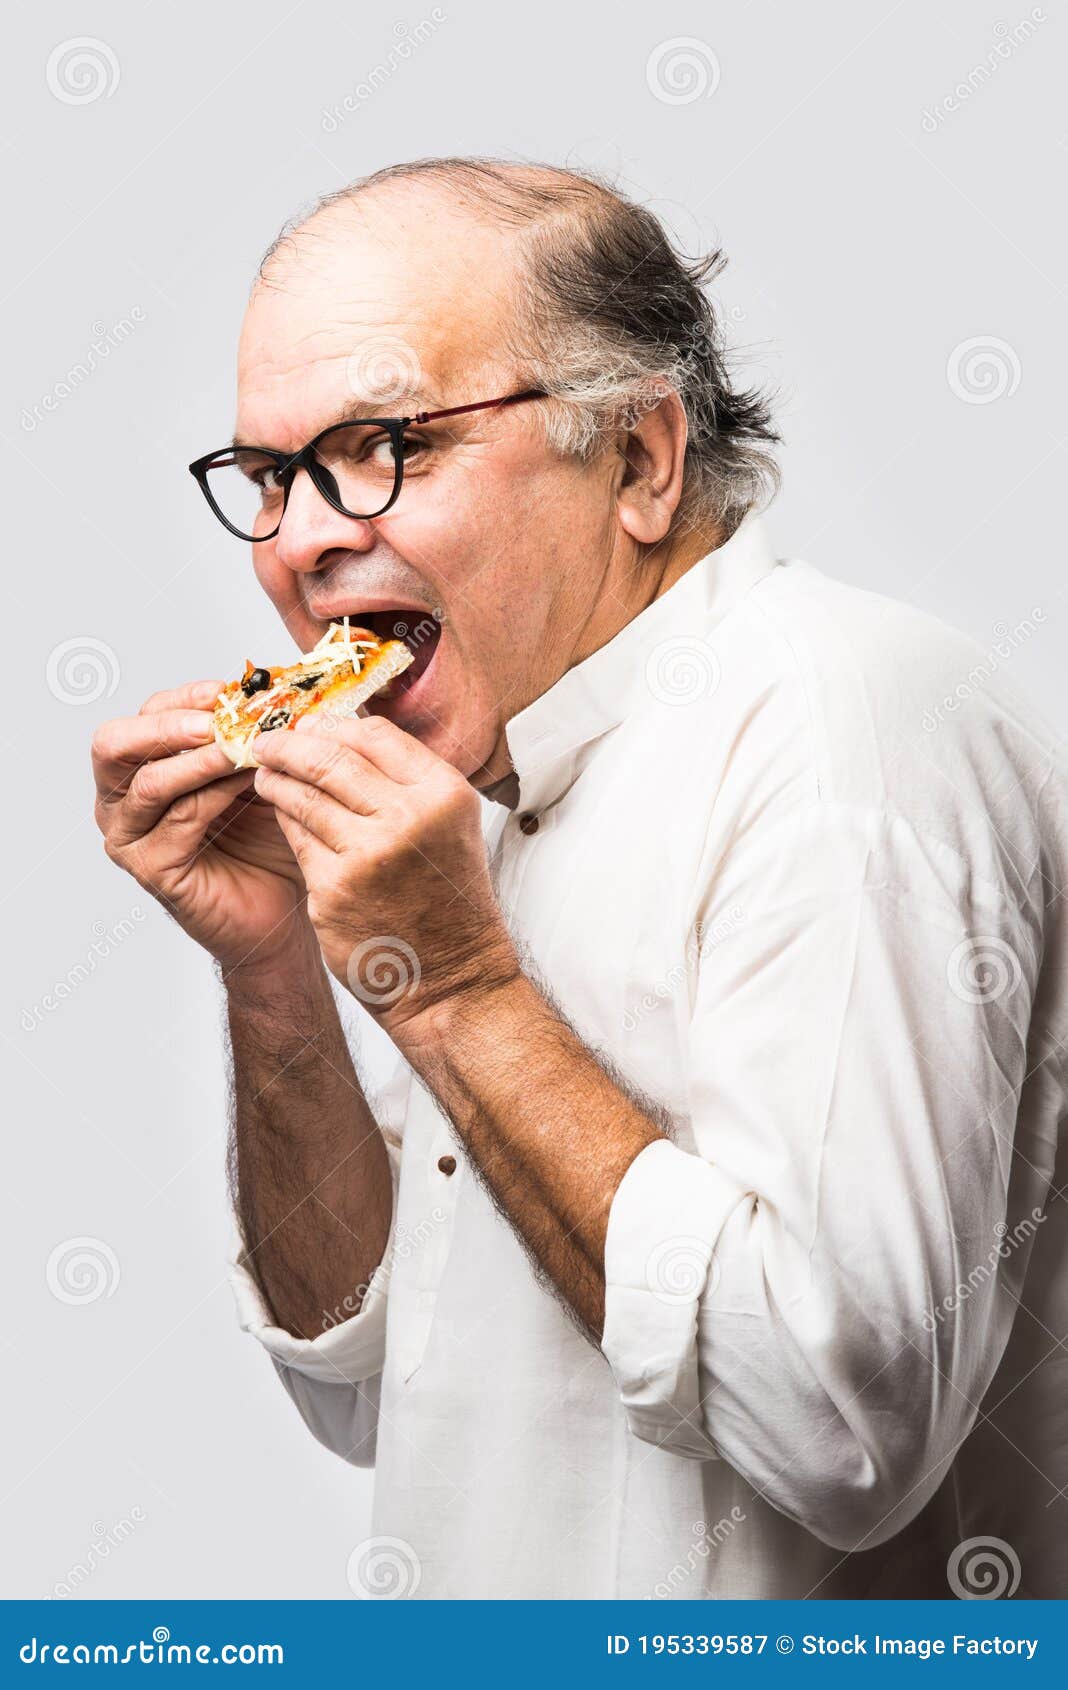 Asian Indian Old Man Eating Pizza with Funny Expressions Stock Image -  Image of joyful, expression: 195339587